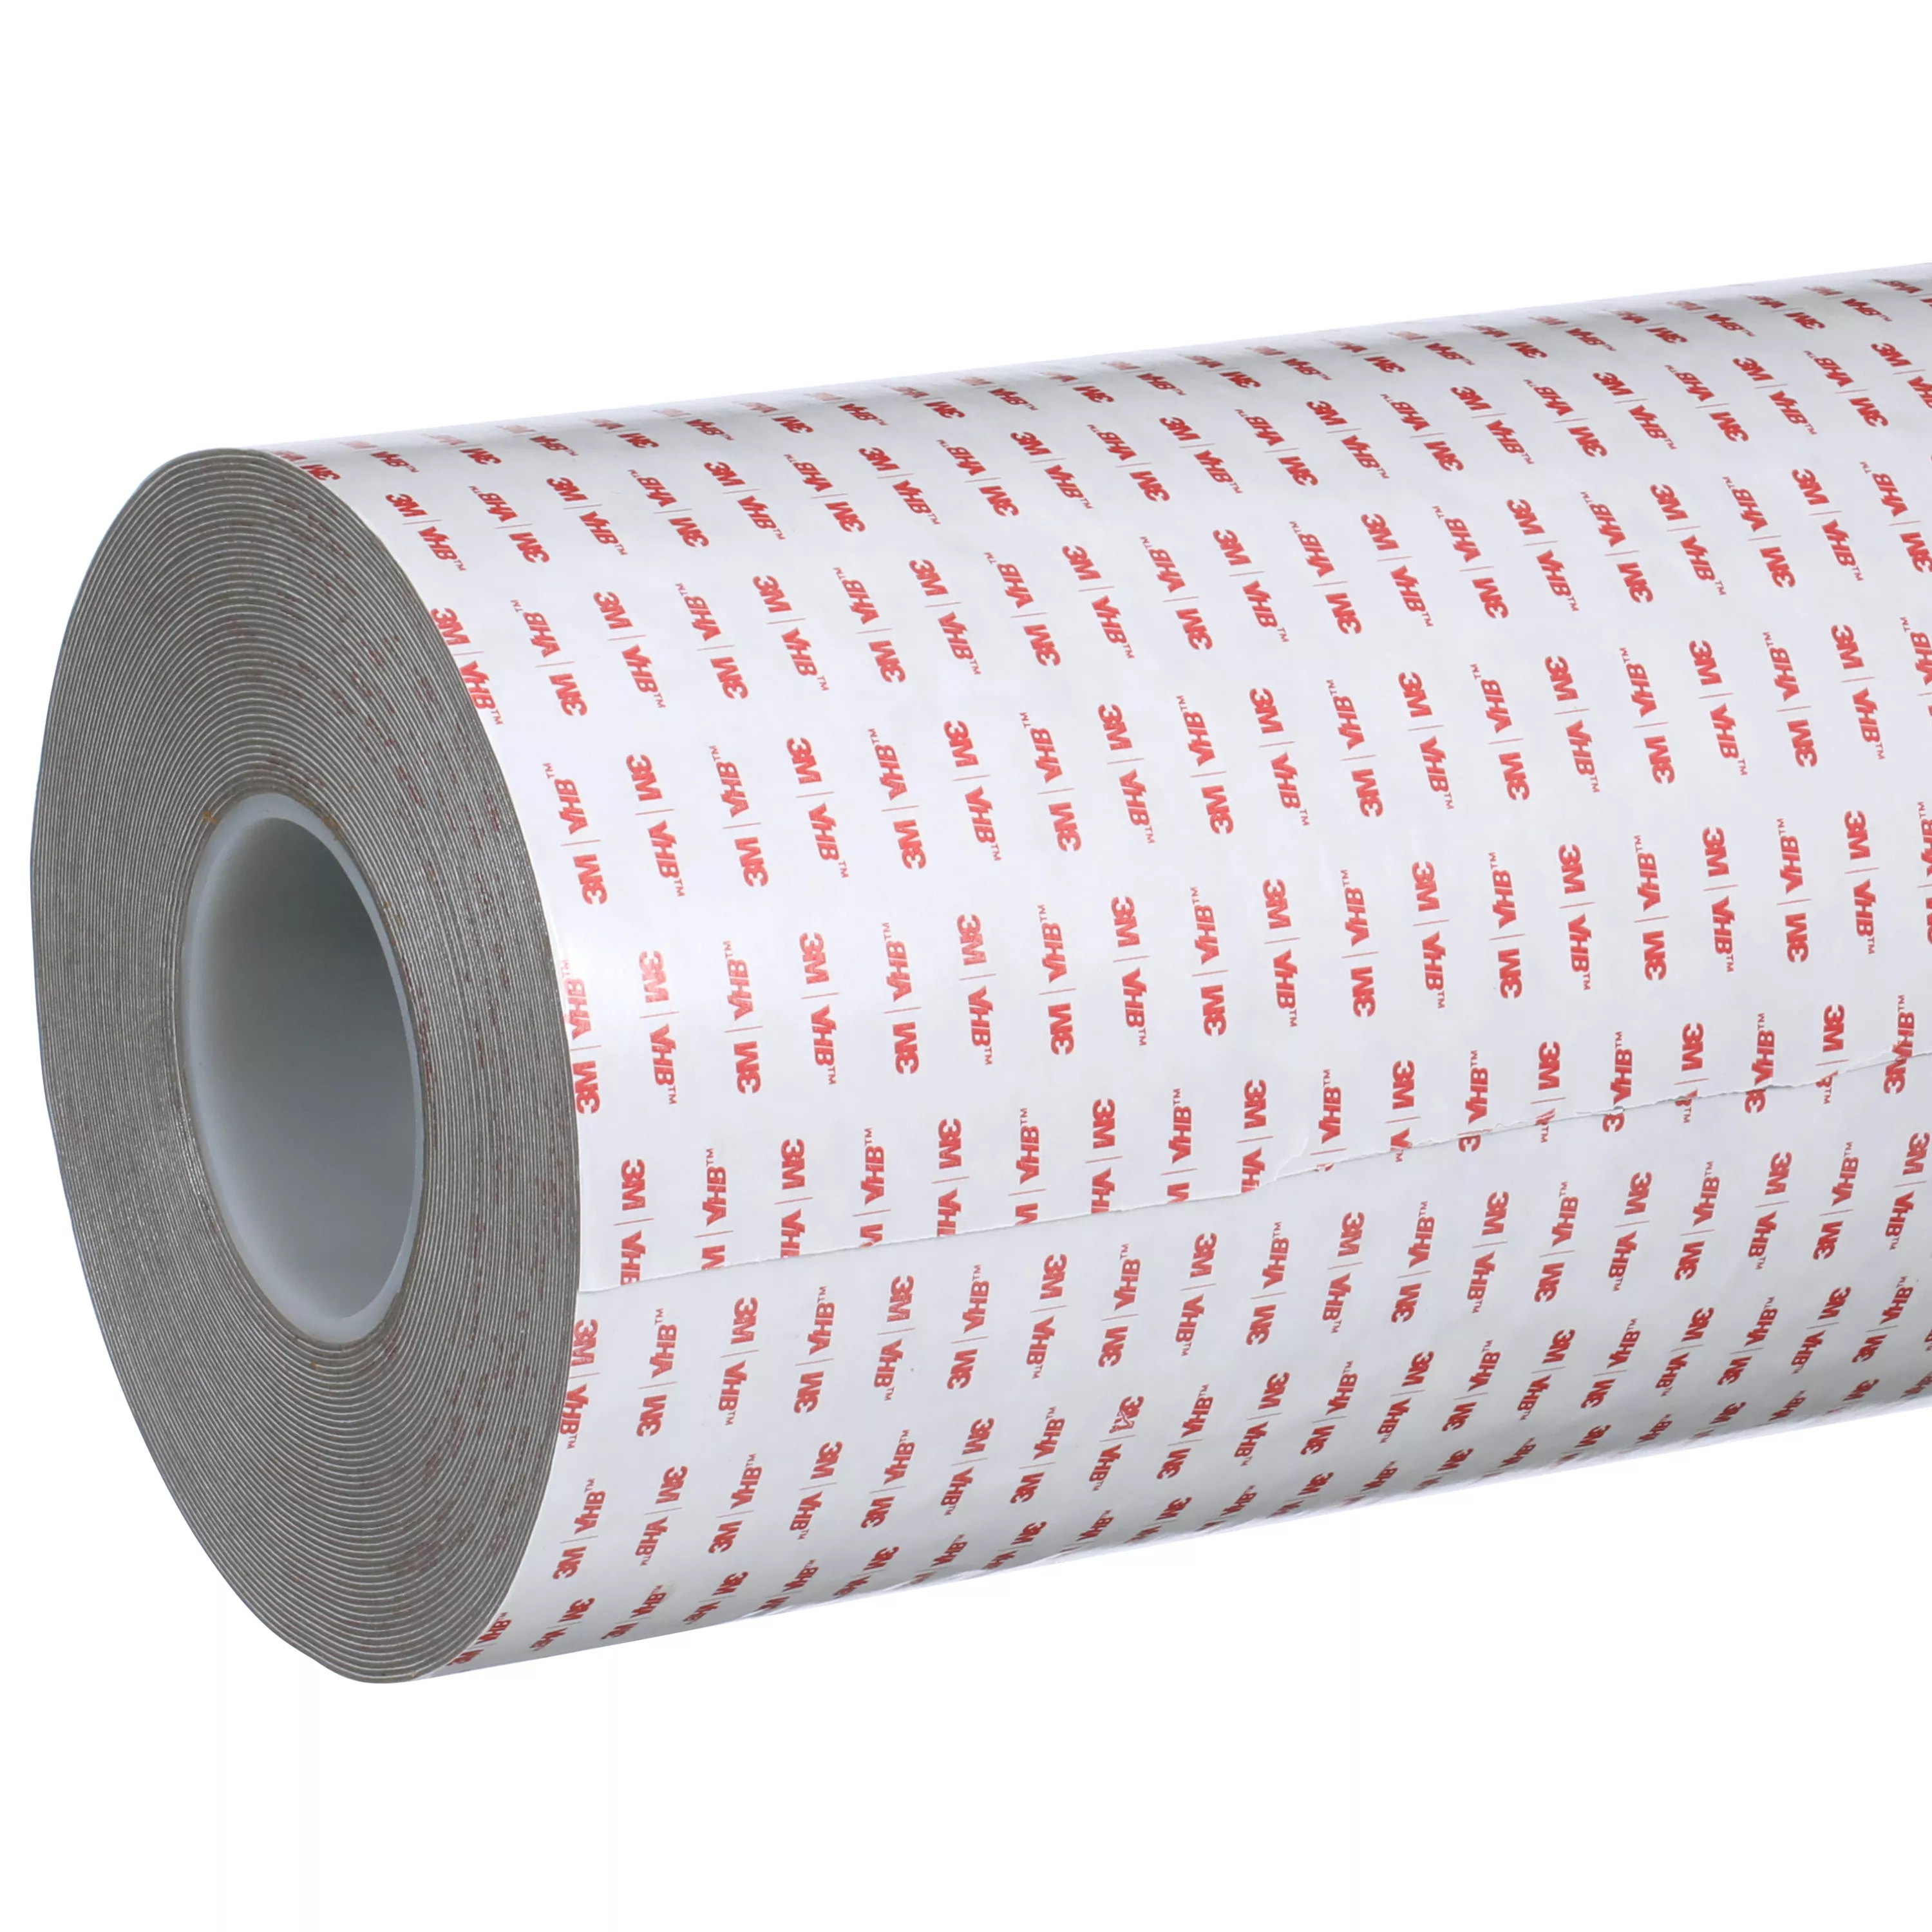 3M™ VHB™ Tape RP+040GP, Gray, 22 in x 36 yd, 16 mil, Paper Liner, 1 Roll/Case